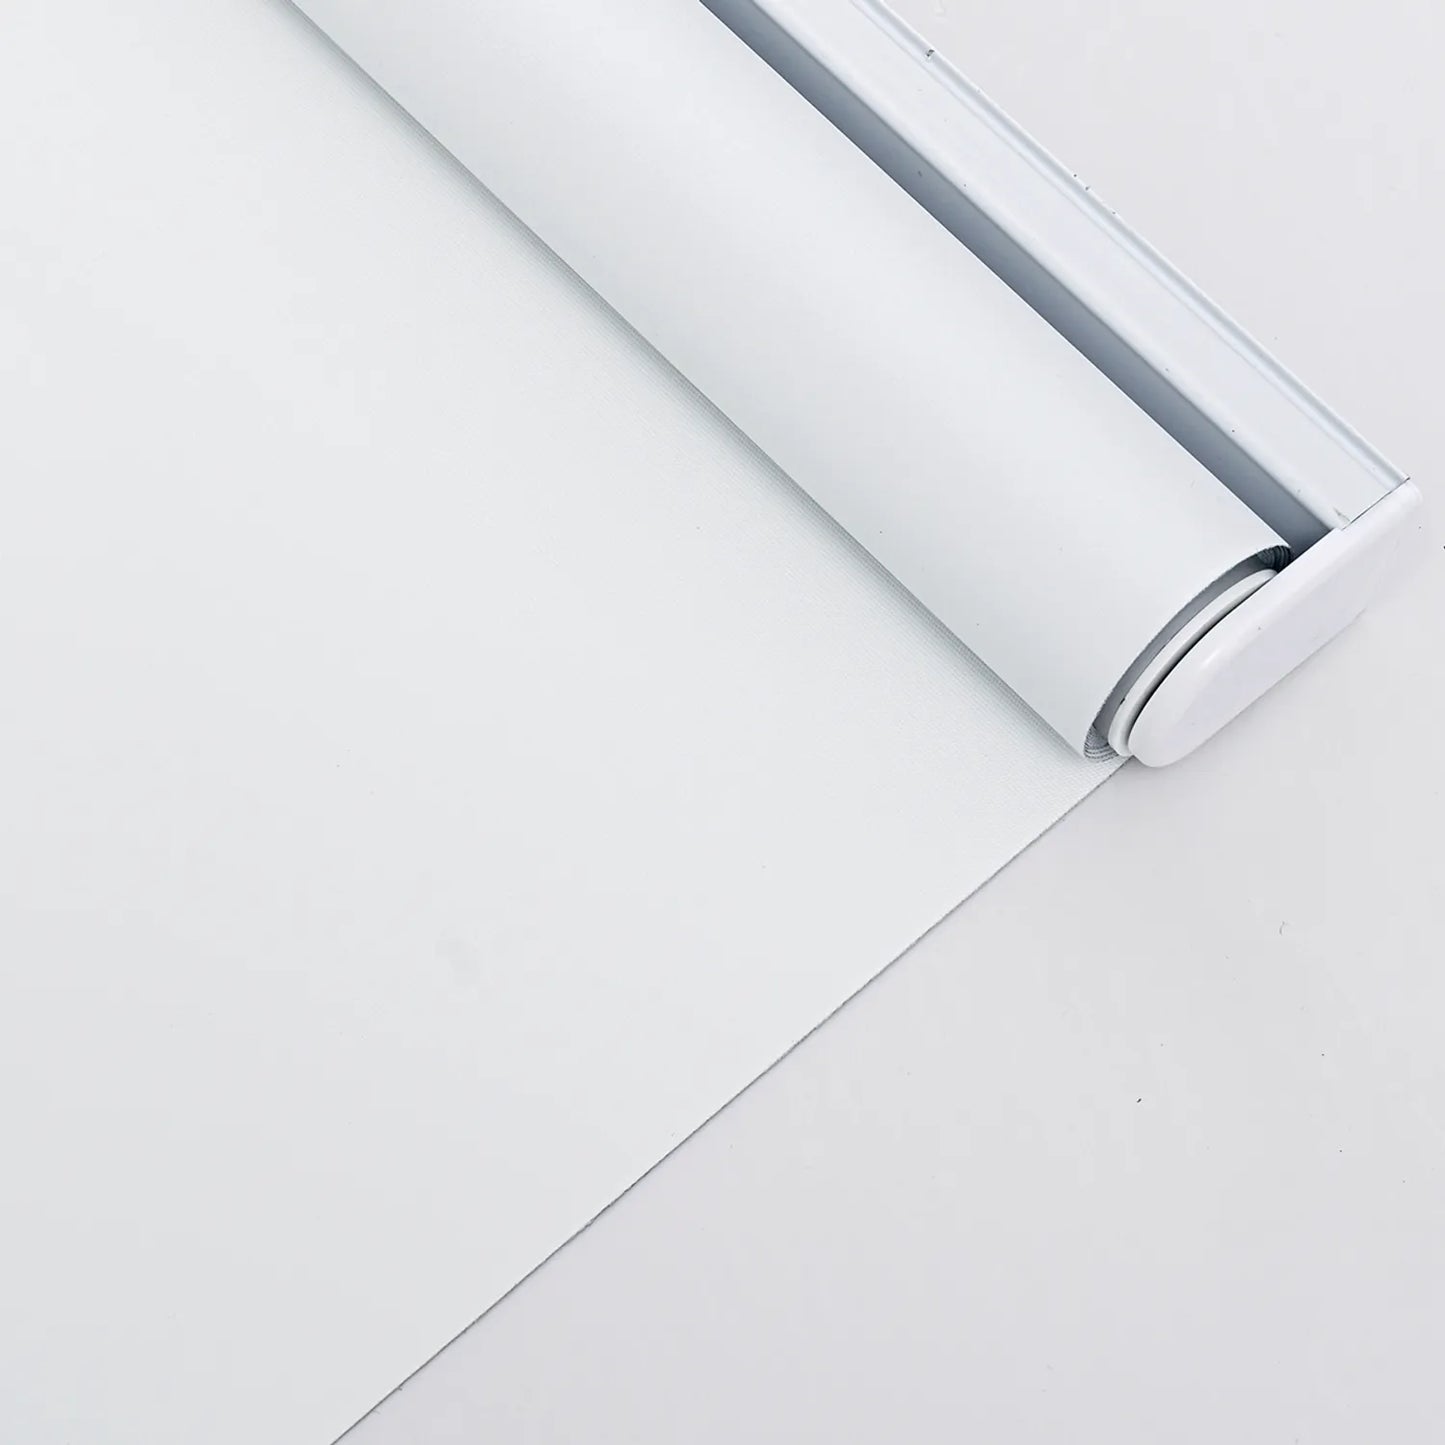 Close-up of partially unrolled EaseEase UV Blocker Roller Blind with sleek metal roller tube, enhancing modern home decor while offering sunlight filtration and UV protection